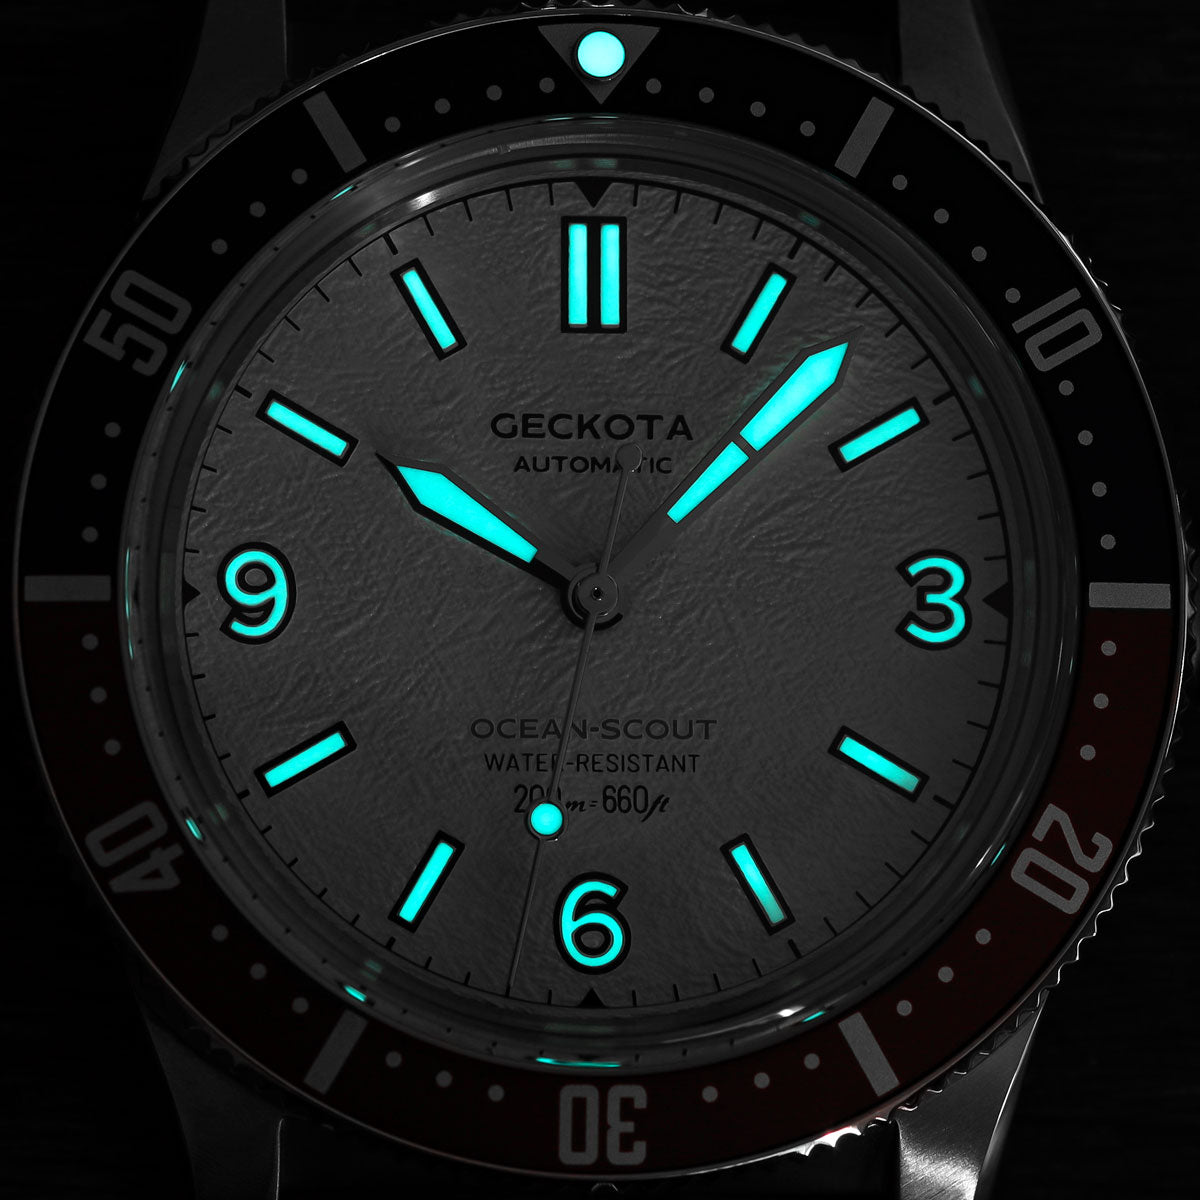 Geckota Ocean-Scout Dive Watch - BWD Arctic - Berwick Stainless Steel Strap - additional image 2